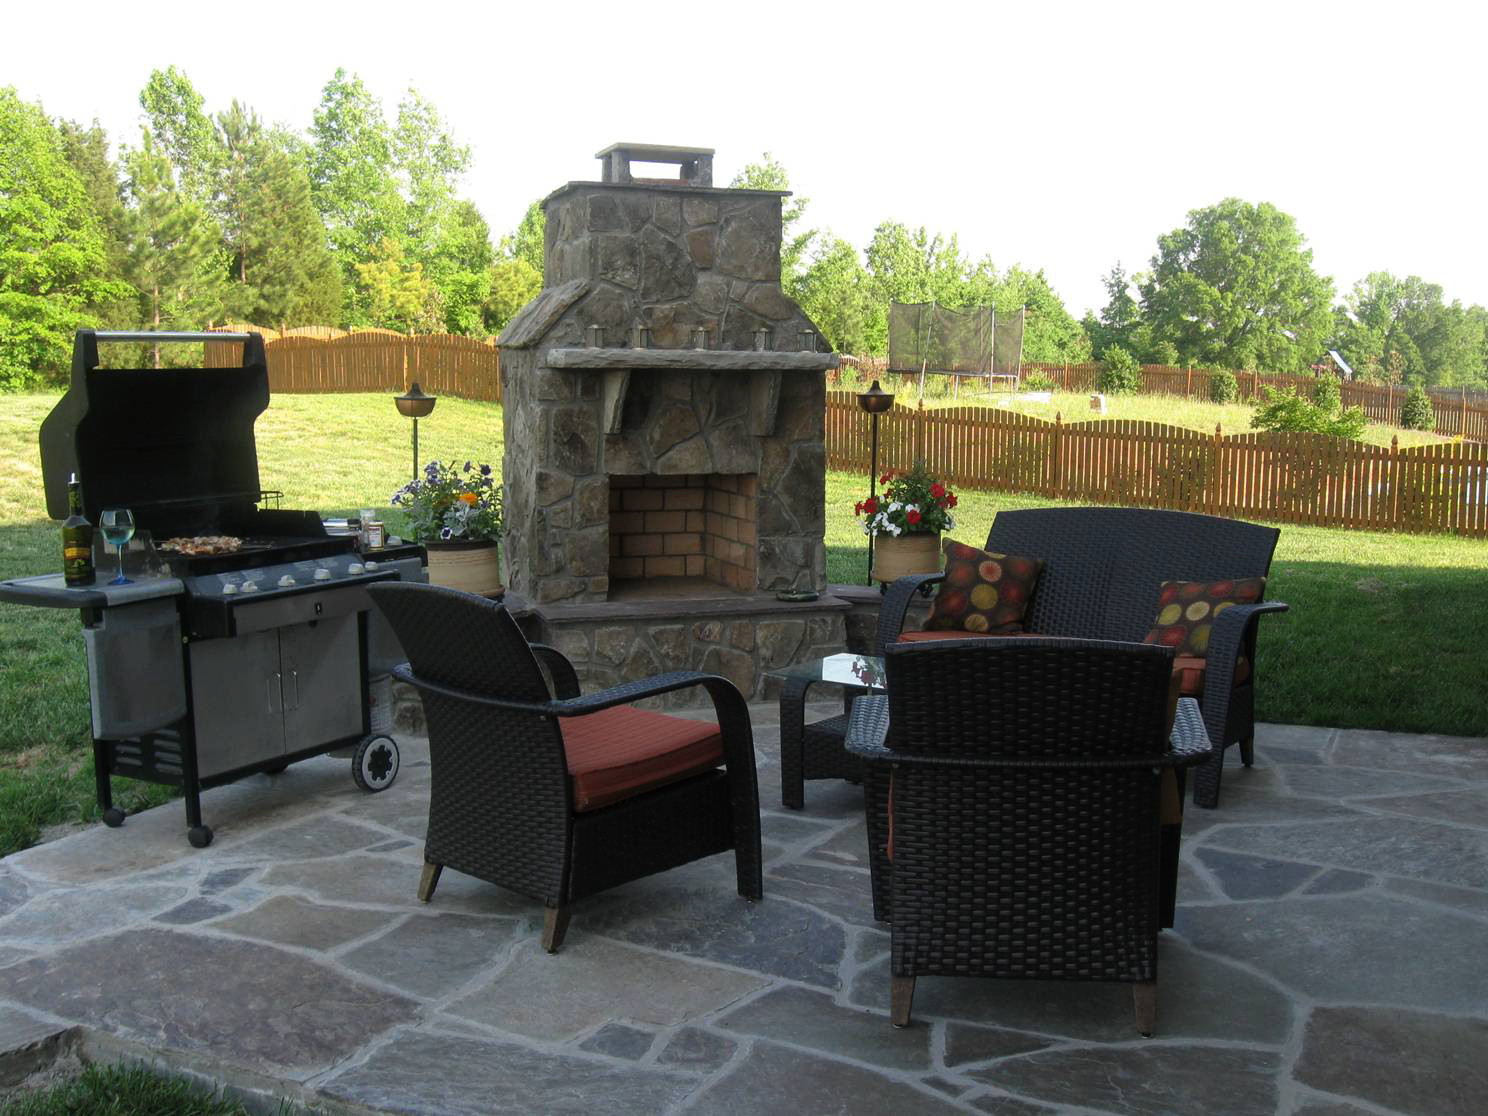 Outdoor Fireplace Or Fire Pit
 How do you make outdoor fireplaces and fire pits safe